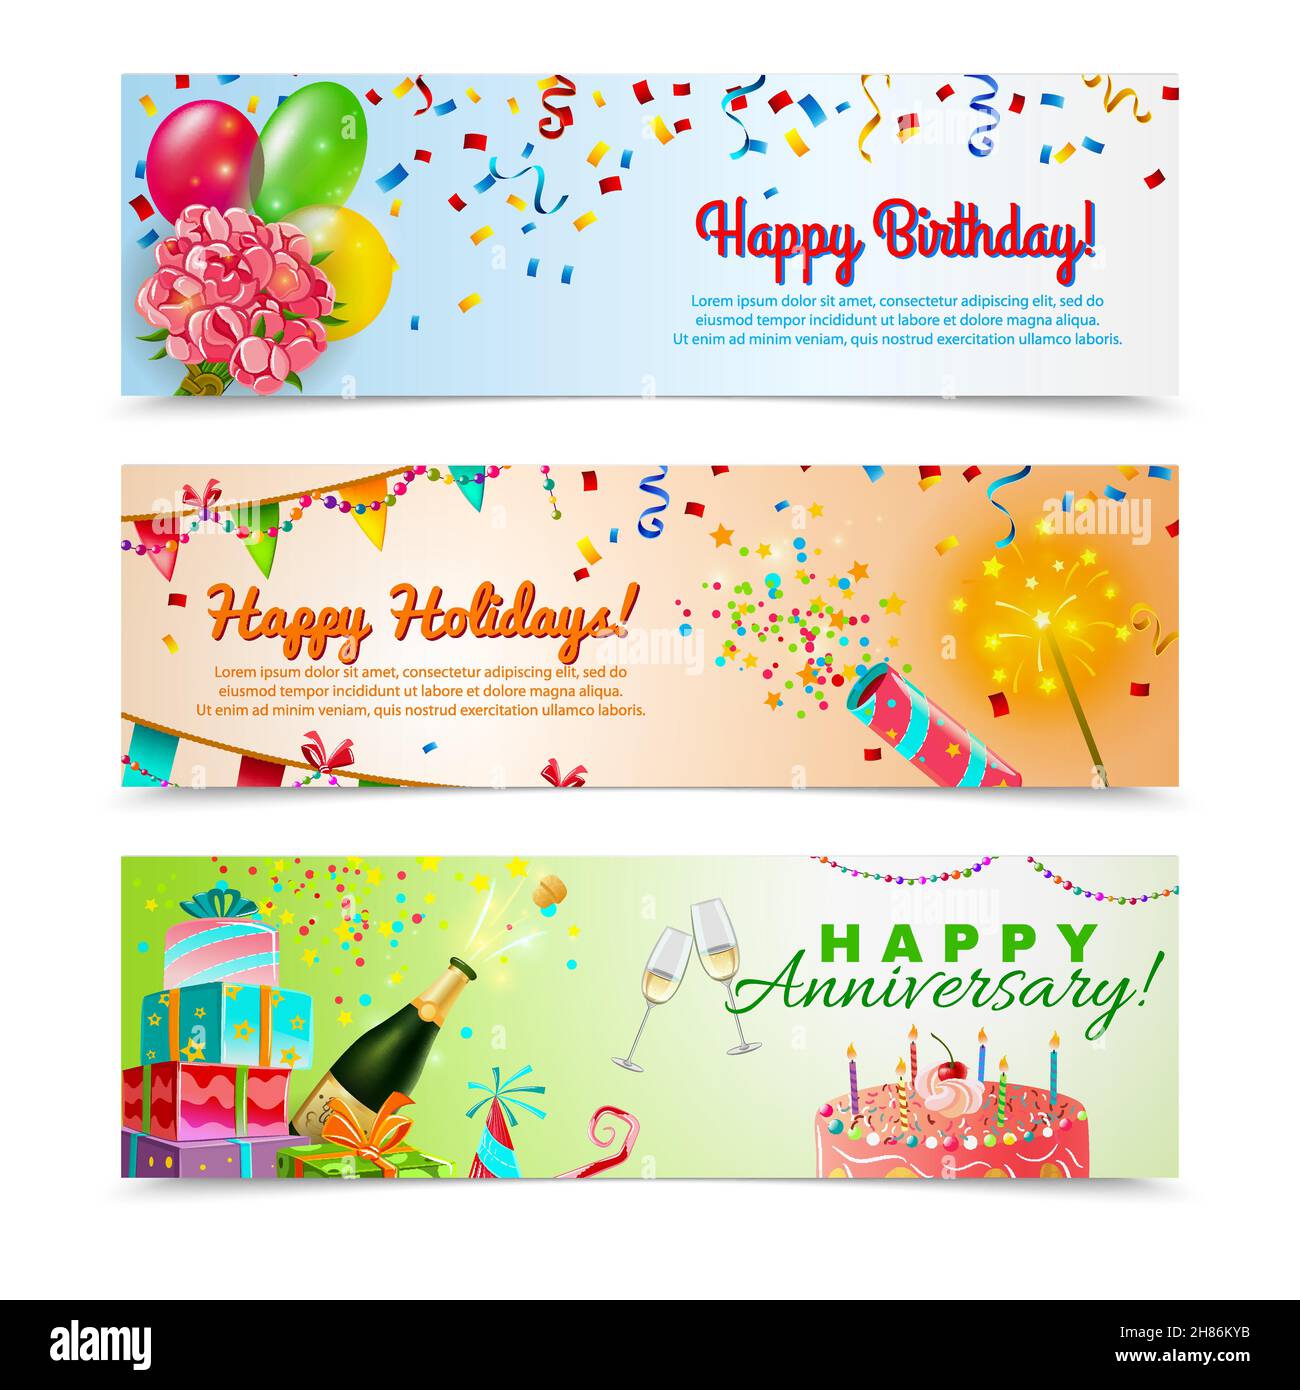 Happy anniversary birthday party celebration in holidays season 3 horizontal festive colorful decorative banners abstract vector illustration Stock Vector